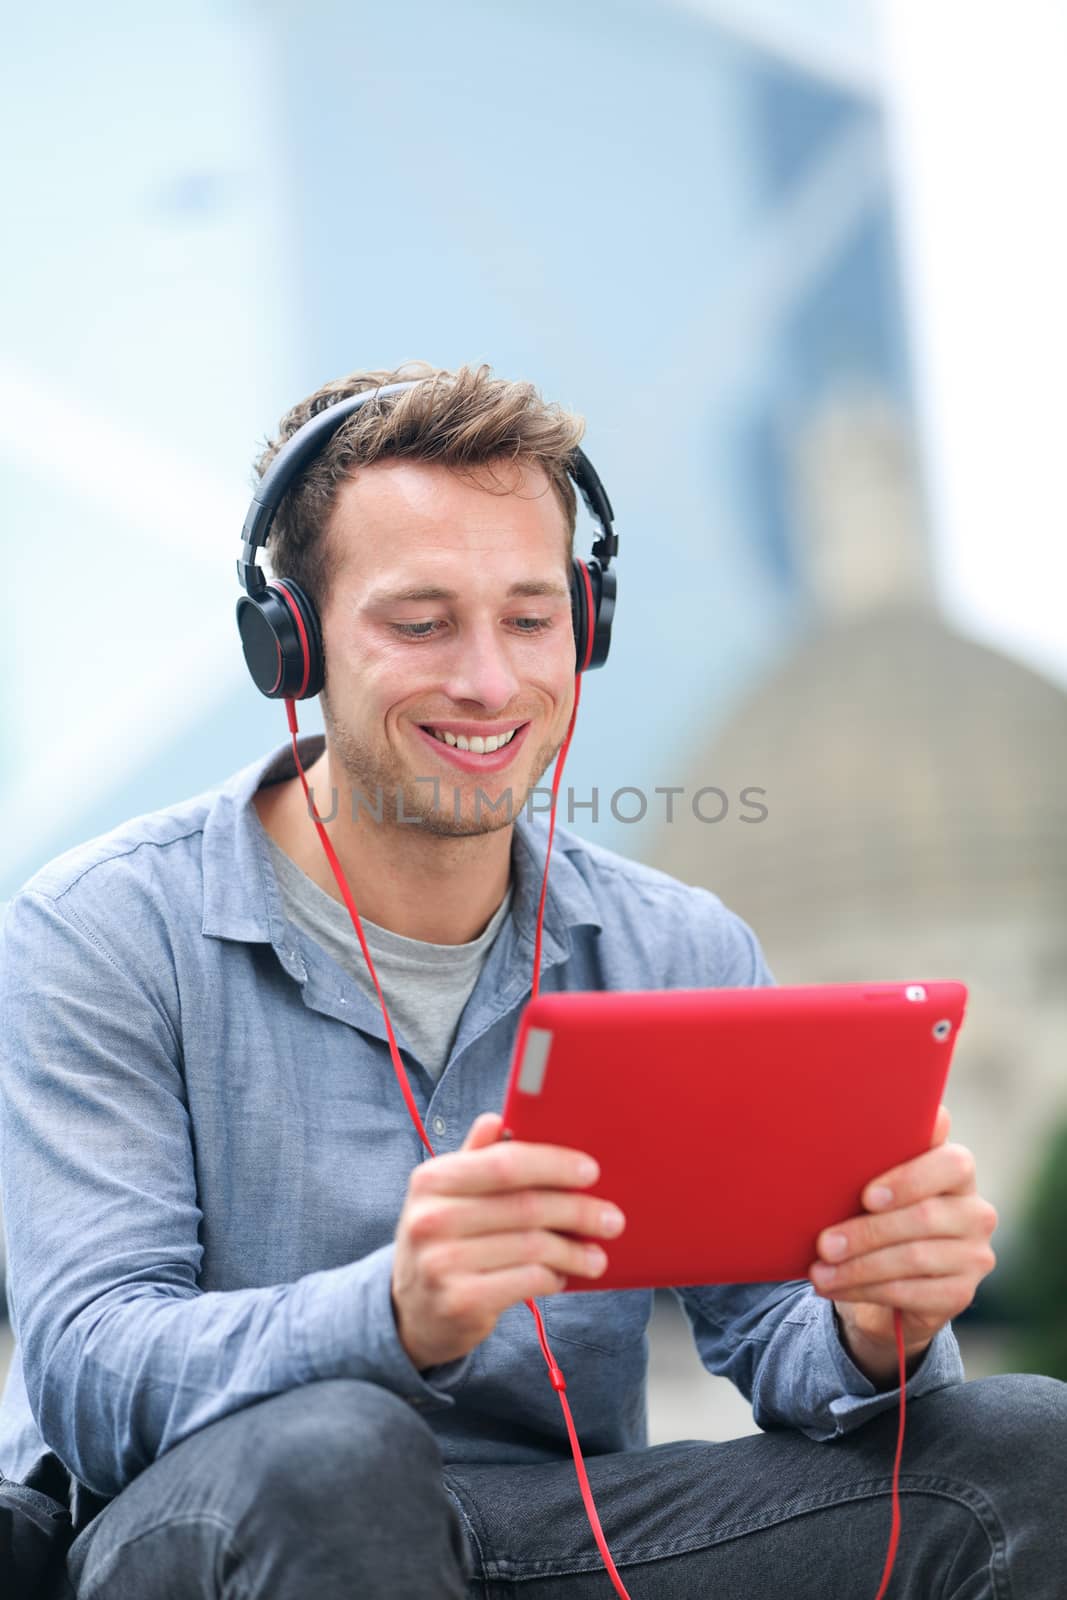 Video chat conversation. Man talking on tablet pc sitting outside using app on 4g wireless device wearing headphones. Casual young urban professional male in his late 20s.